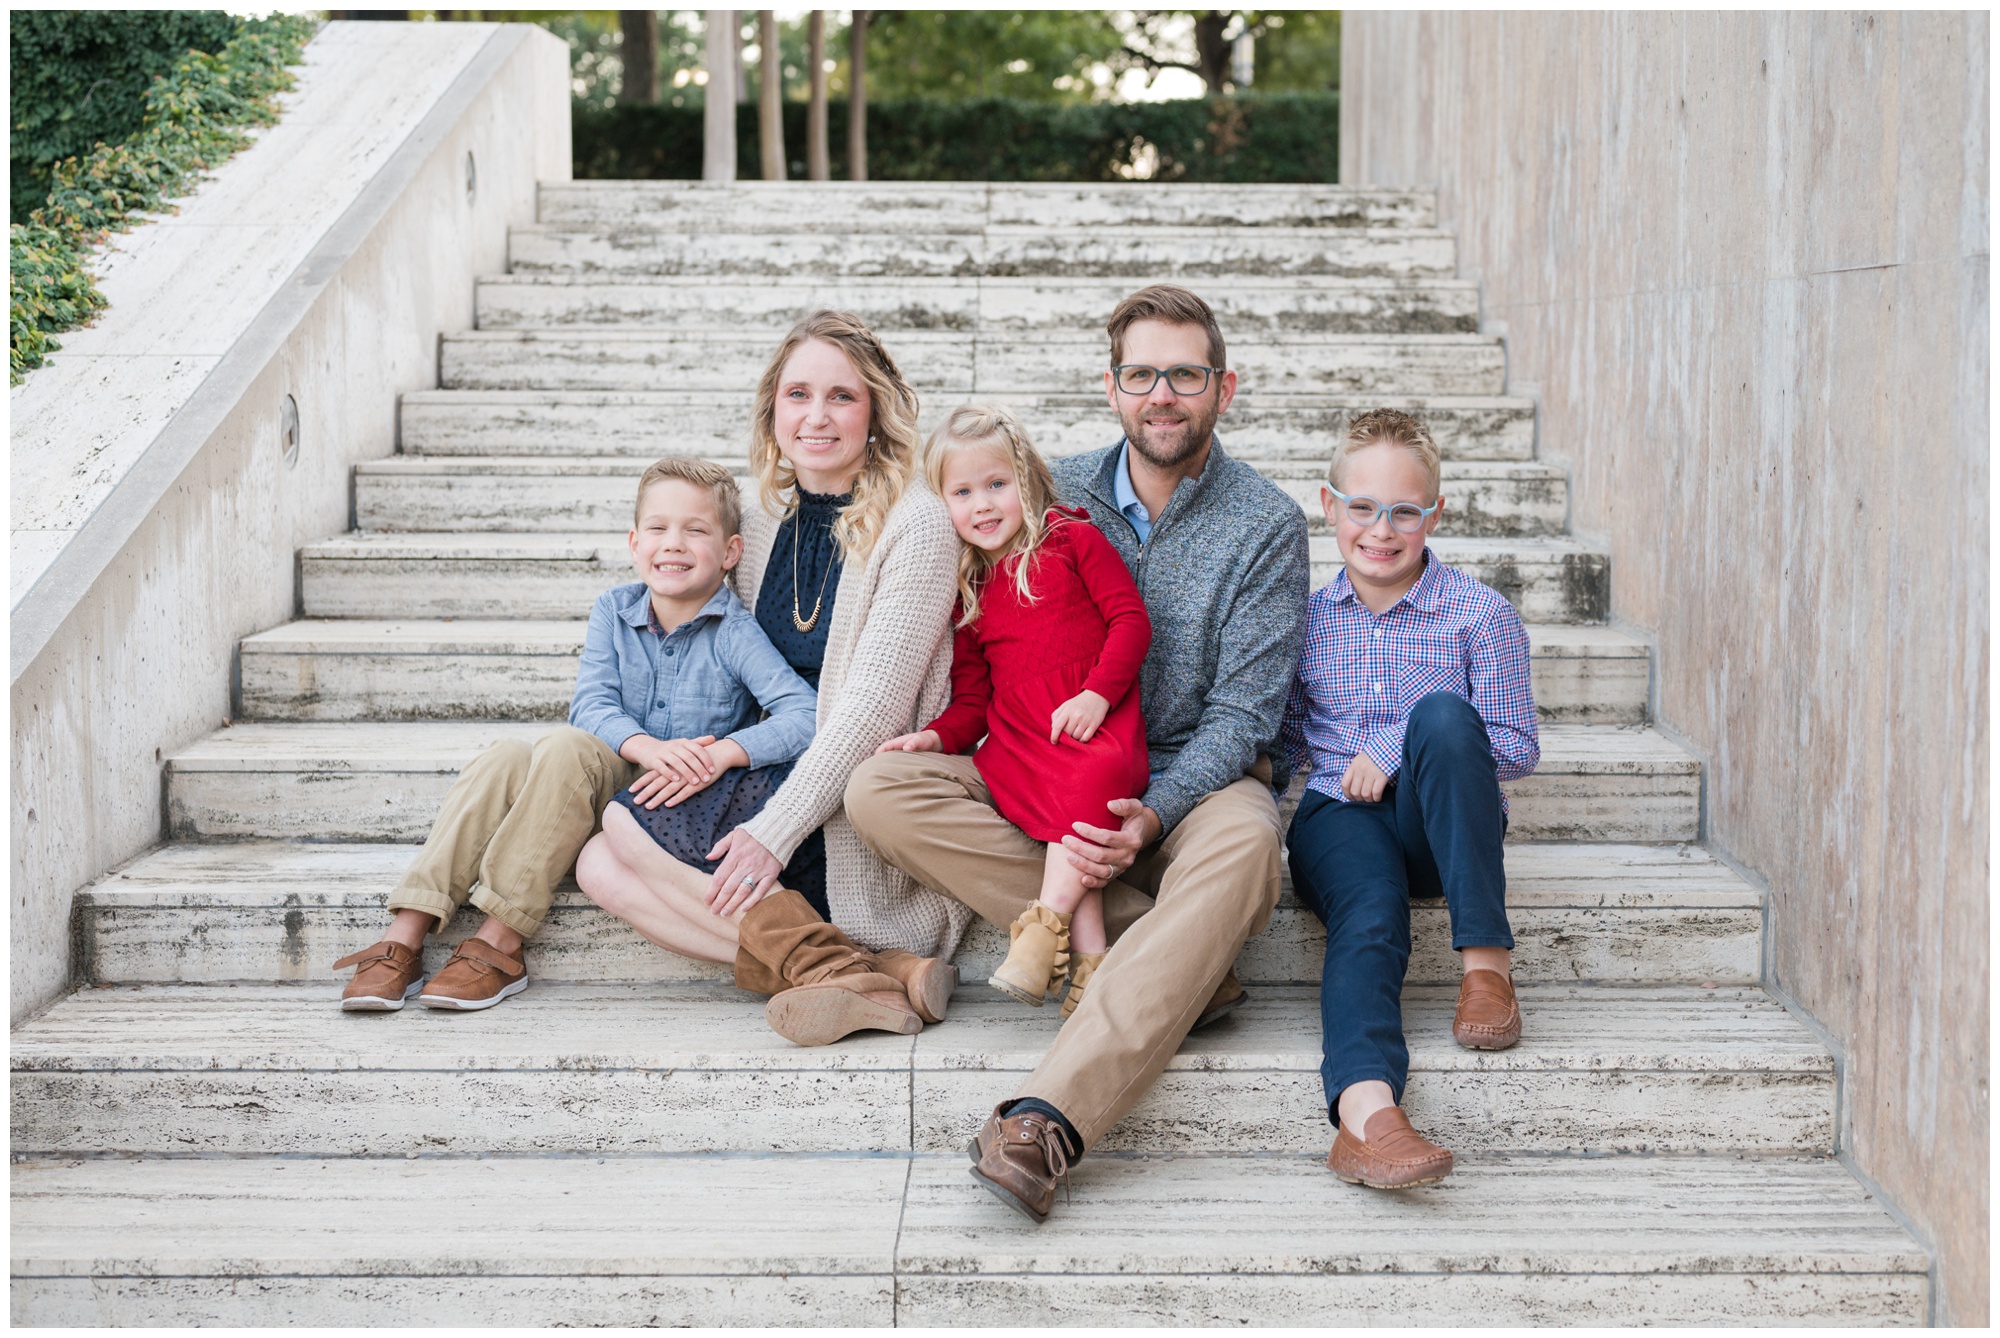 Fort Worth Kimbell Art Museum | Fort Worth Family Session | Fort Worth Family Photographer | Lauren Grimes Photography